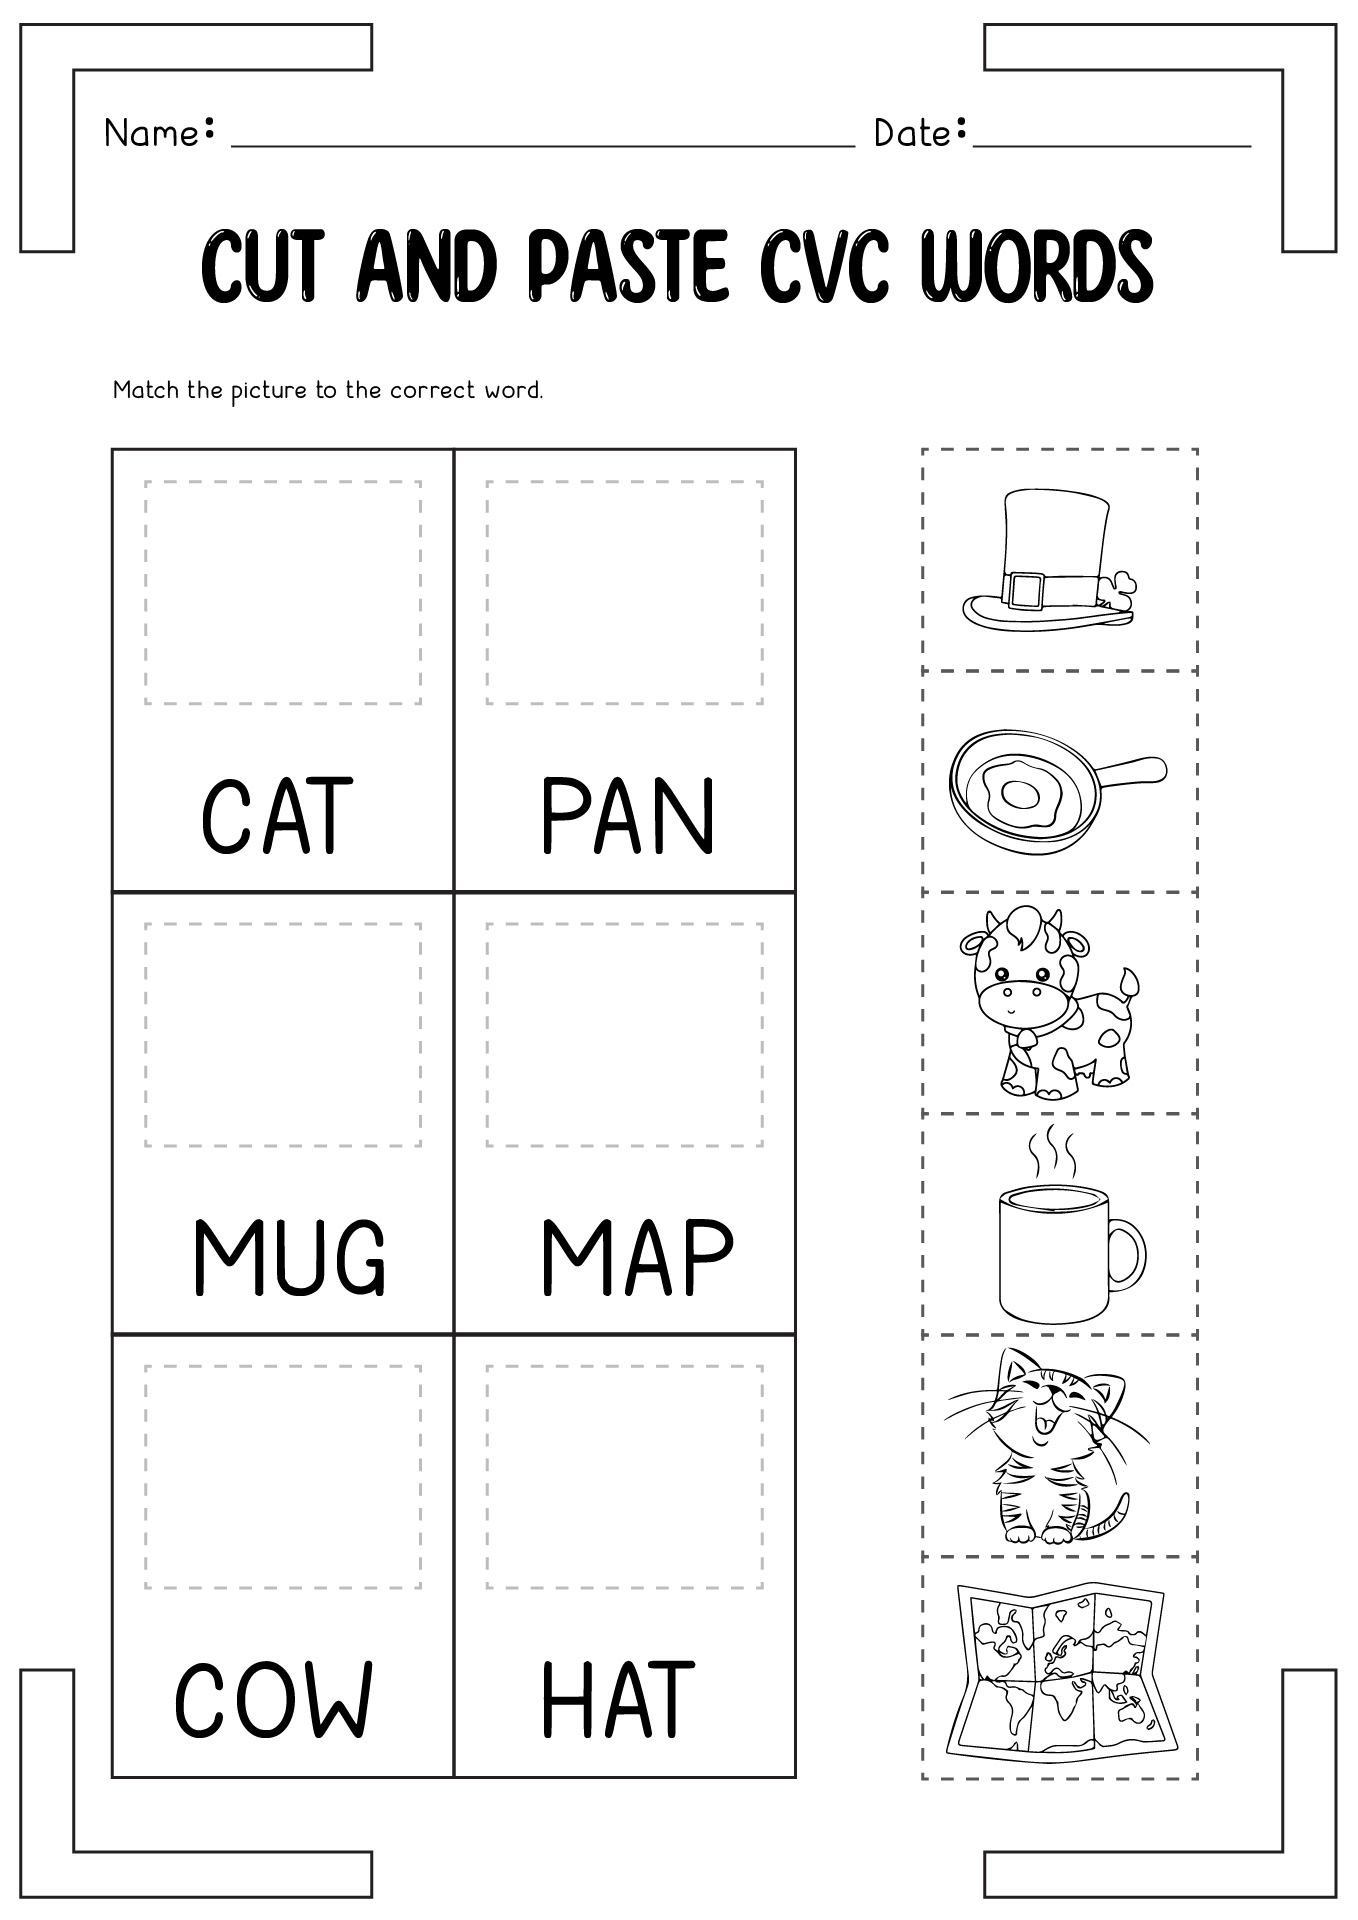 Cut and Paste CVC Words Worksheets